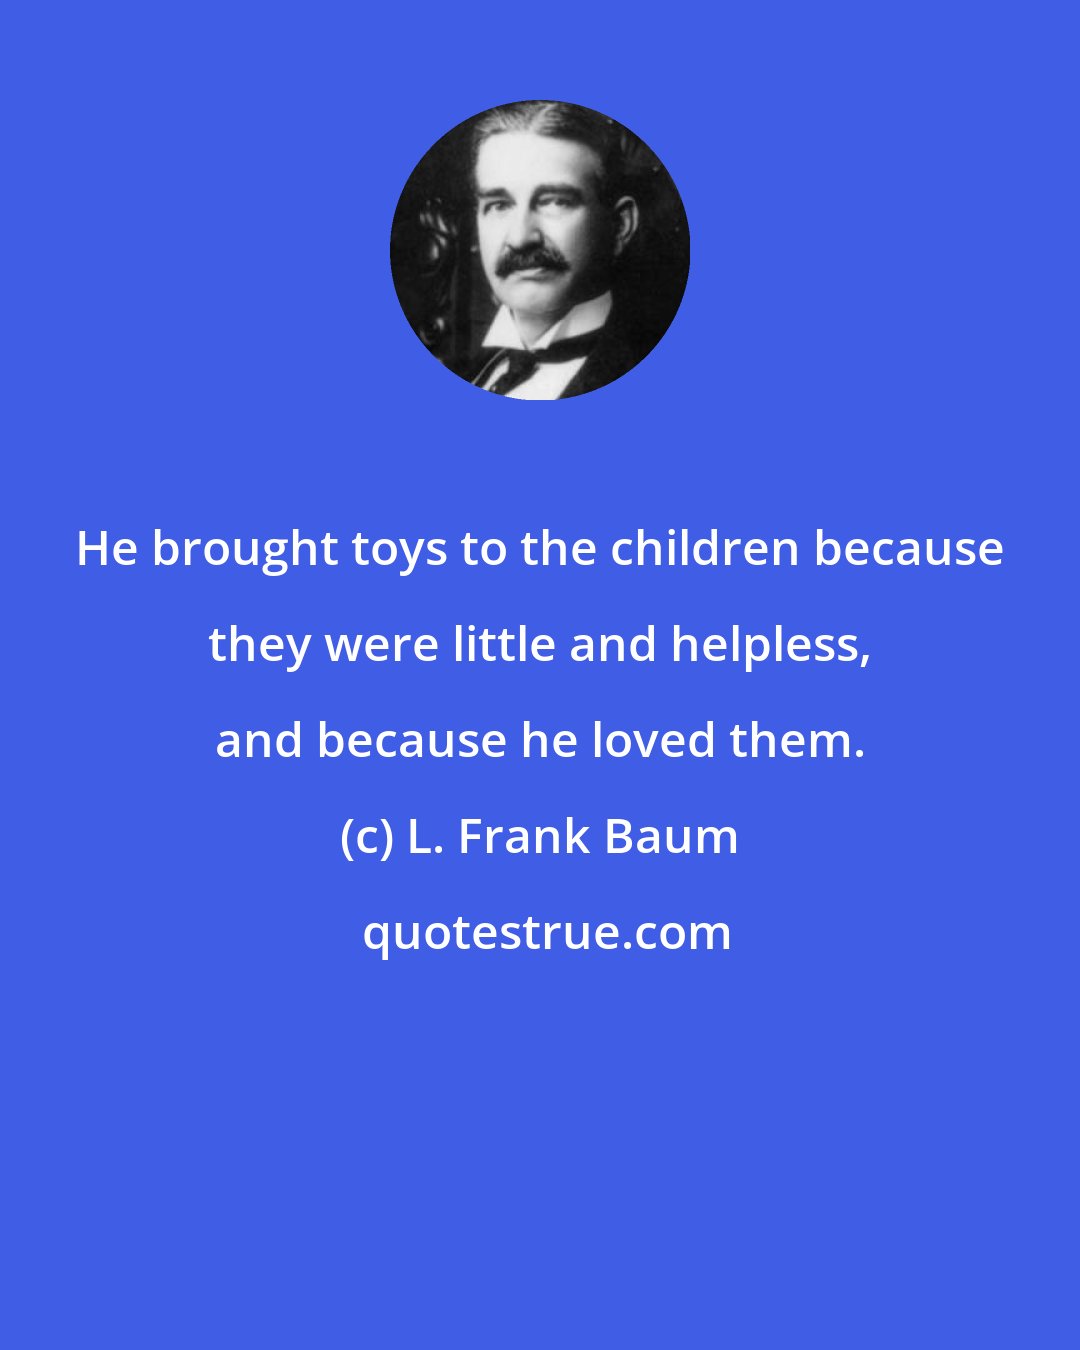 L. Frank Baum: He brought toys to the children because they were little and helpless, and because he loved them.